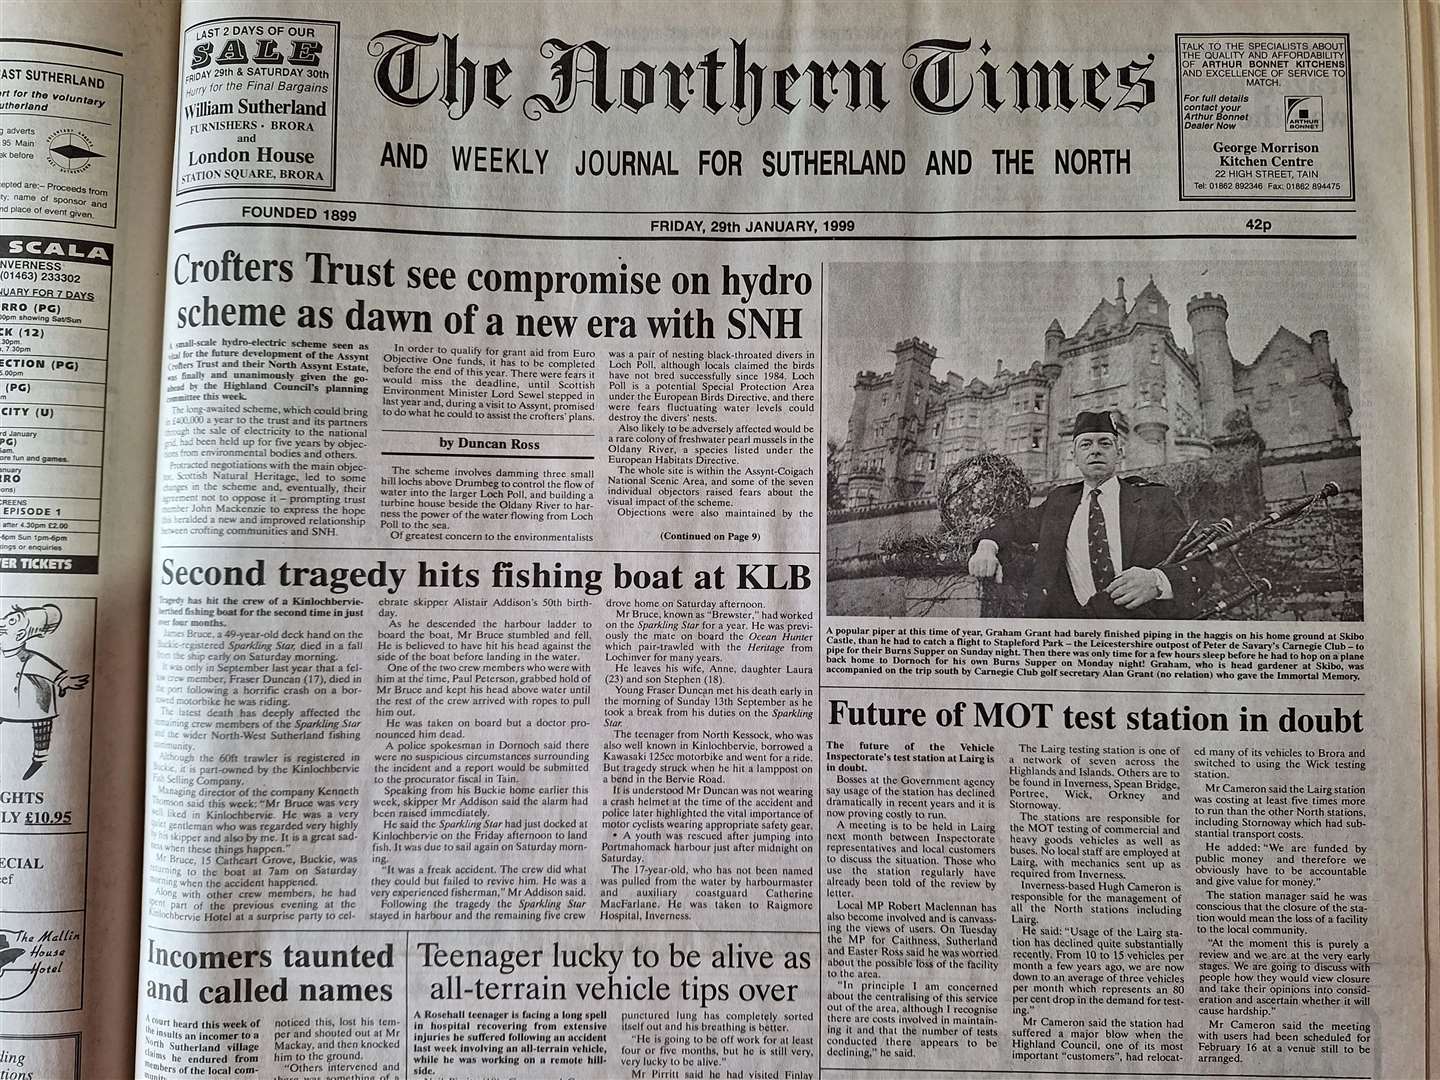 The edition of January 29, 1999.